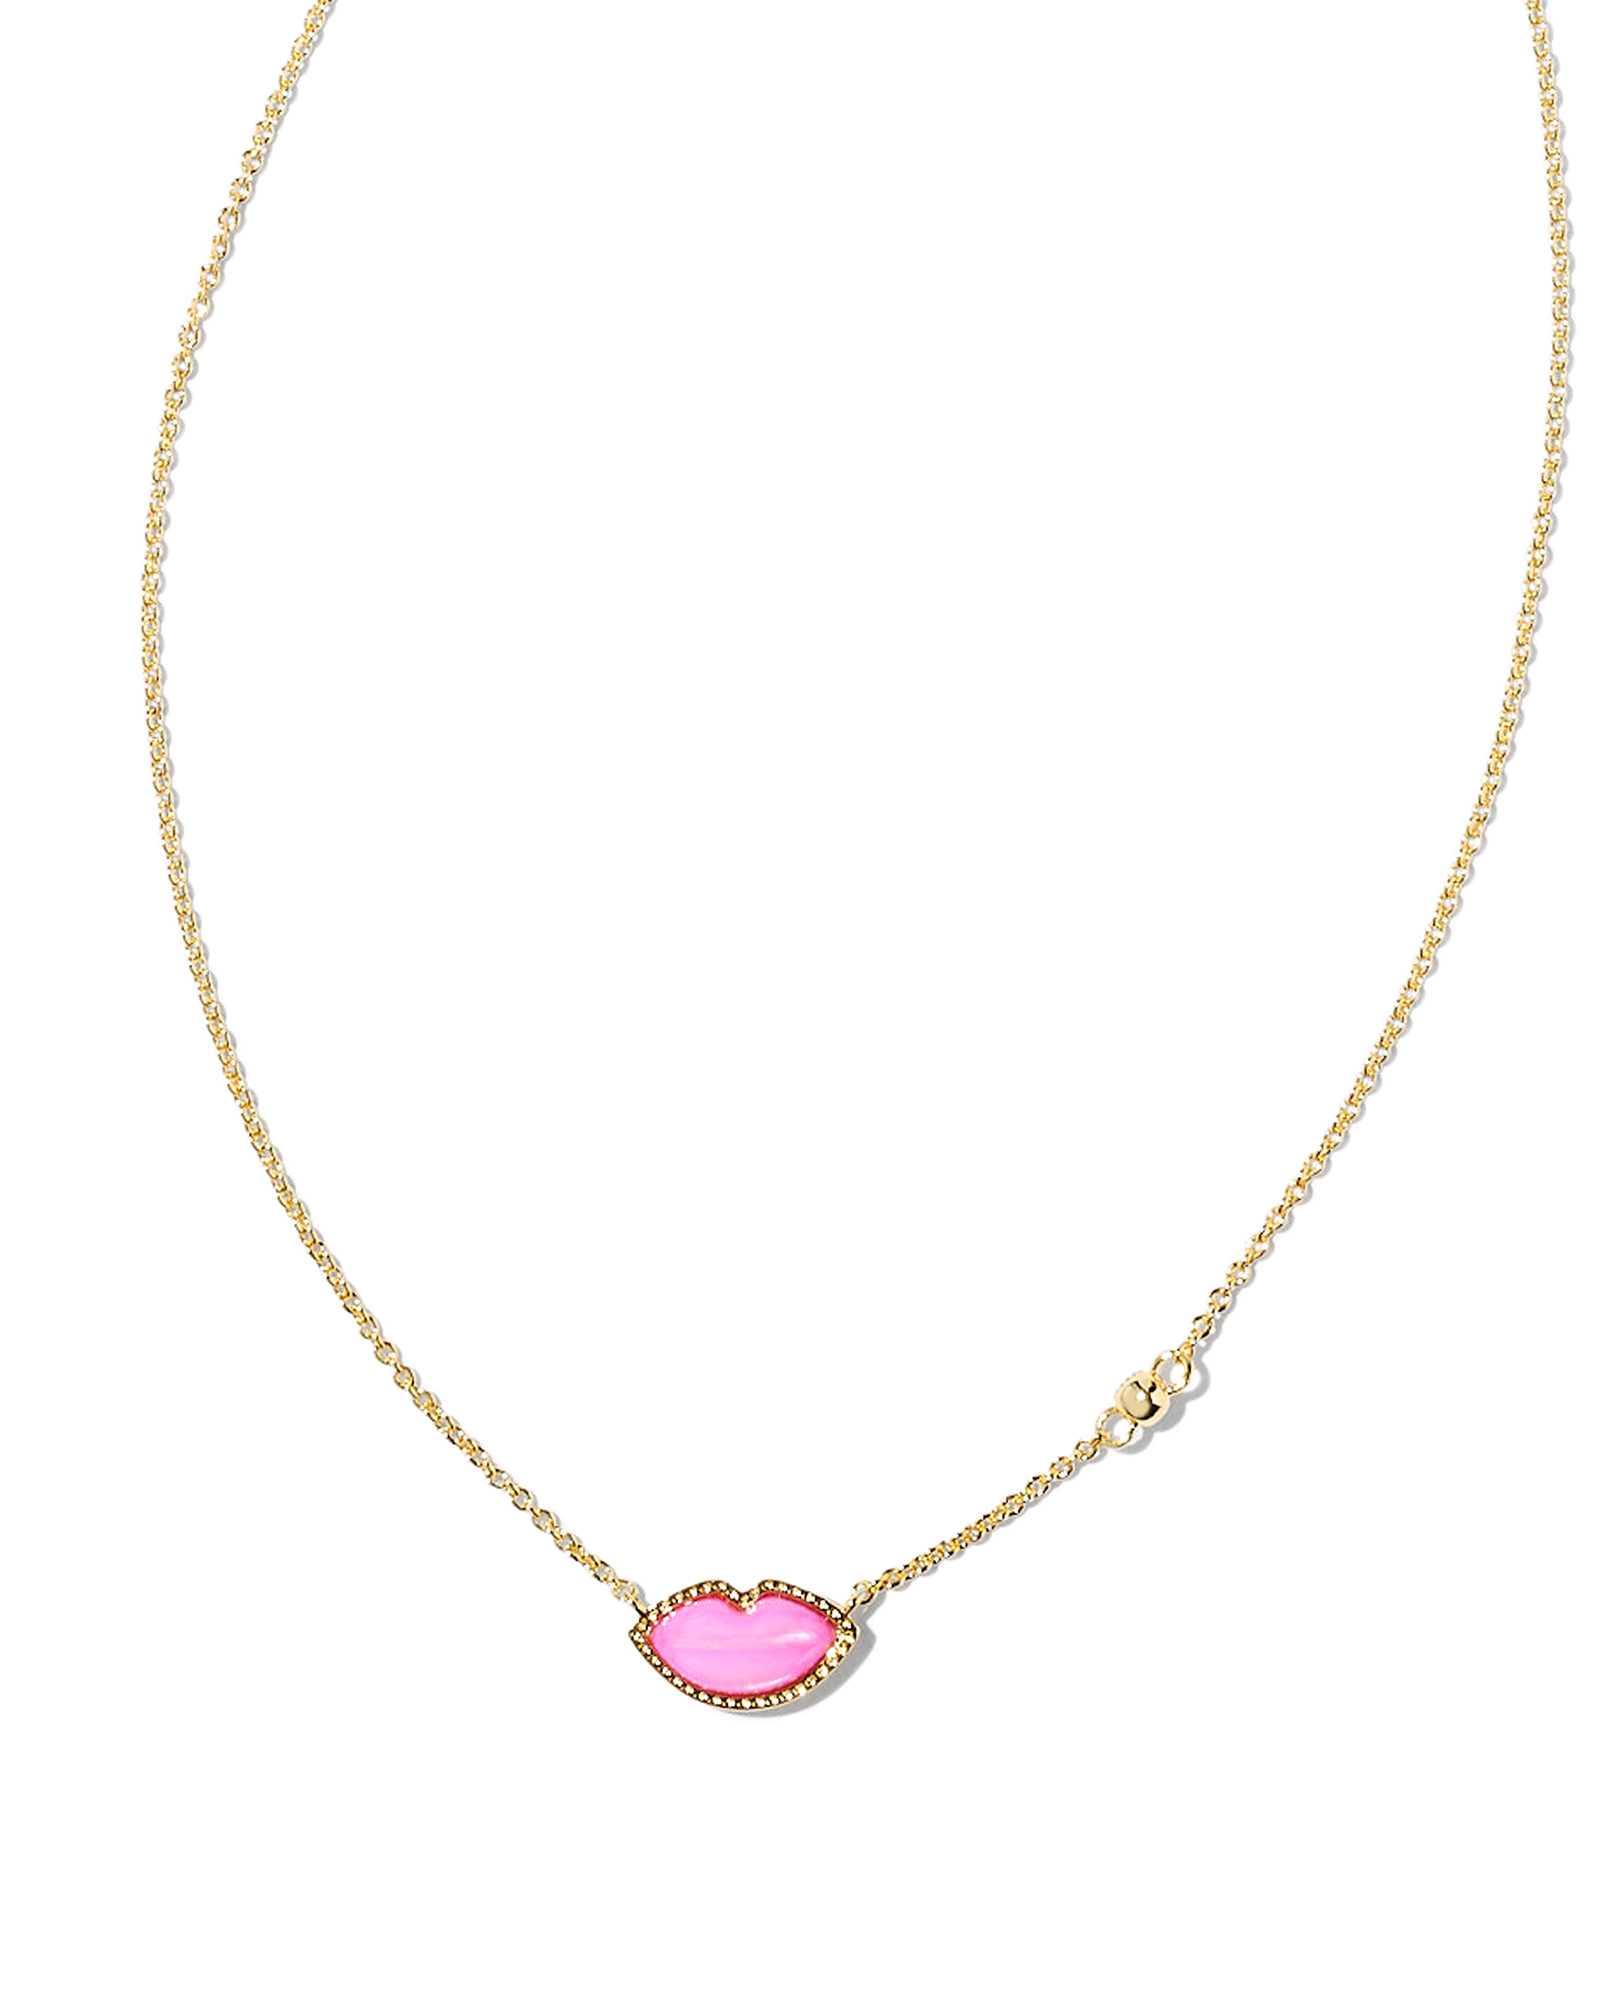 Kendra Scott Lips Pendant Necklace in Hot Pink Mother-of-Pearl | REEDS  Jewelers